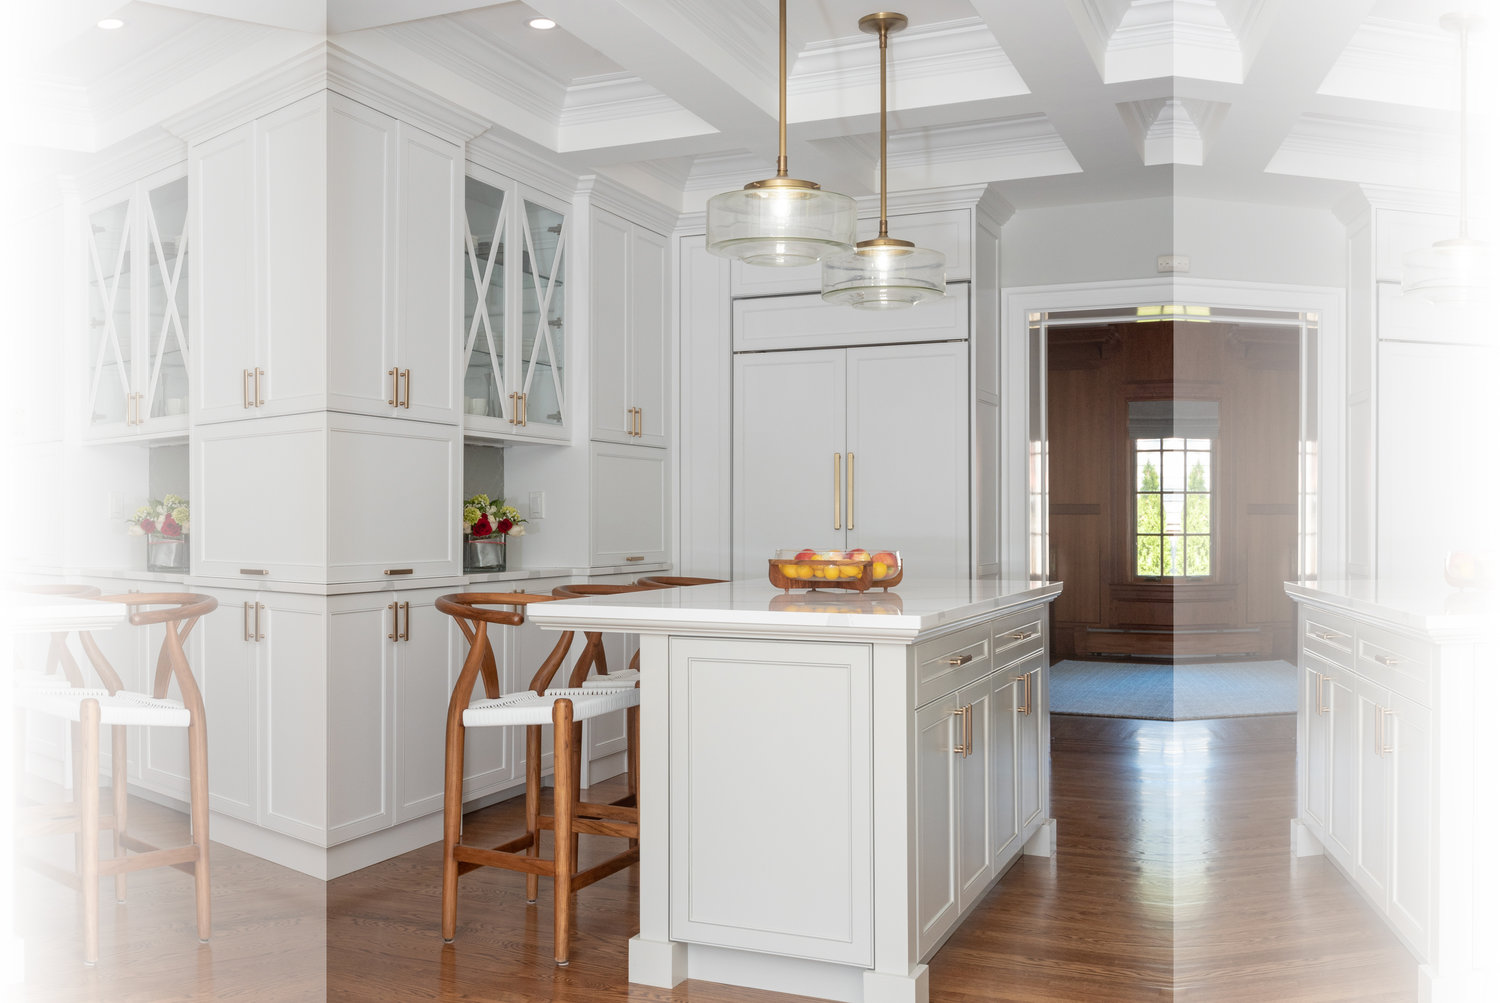 A coffered ceiling to hide a pipe was among the modifications prescibed in this kitchen remodel